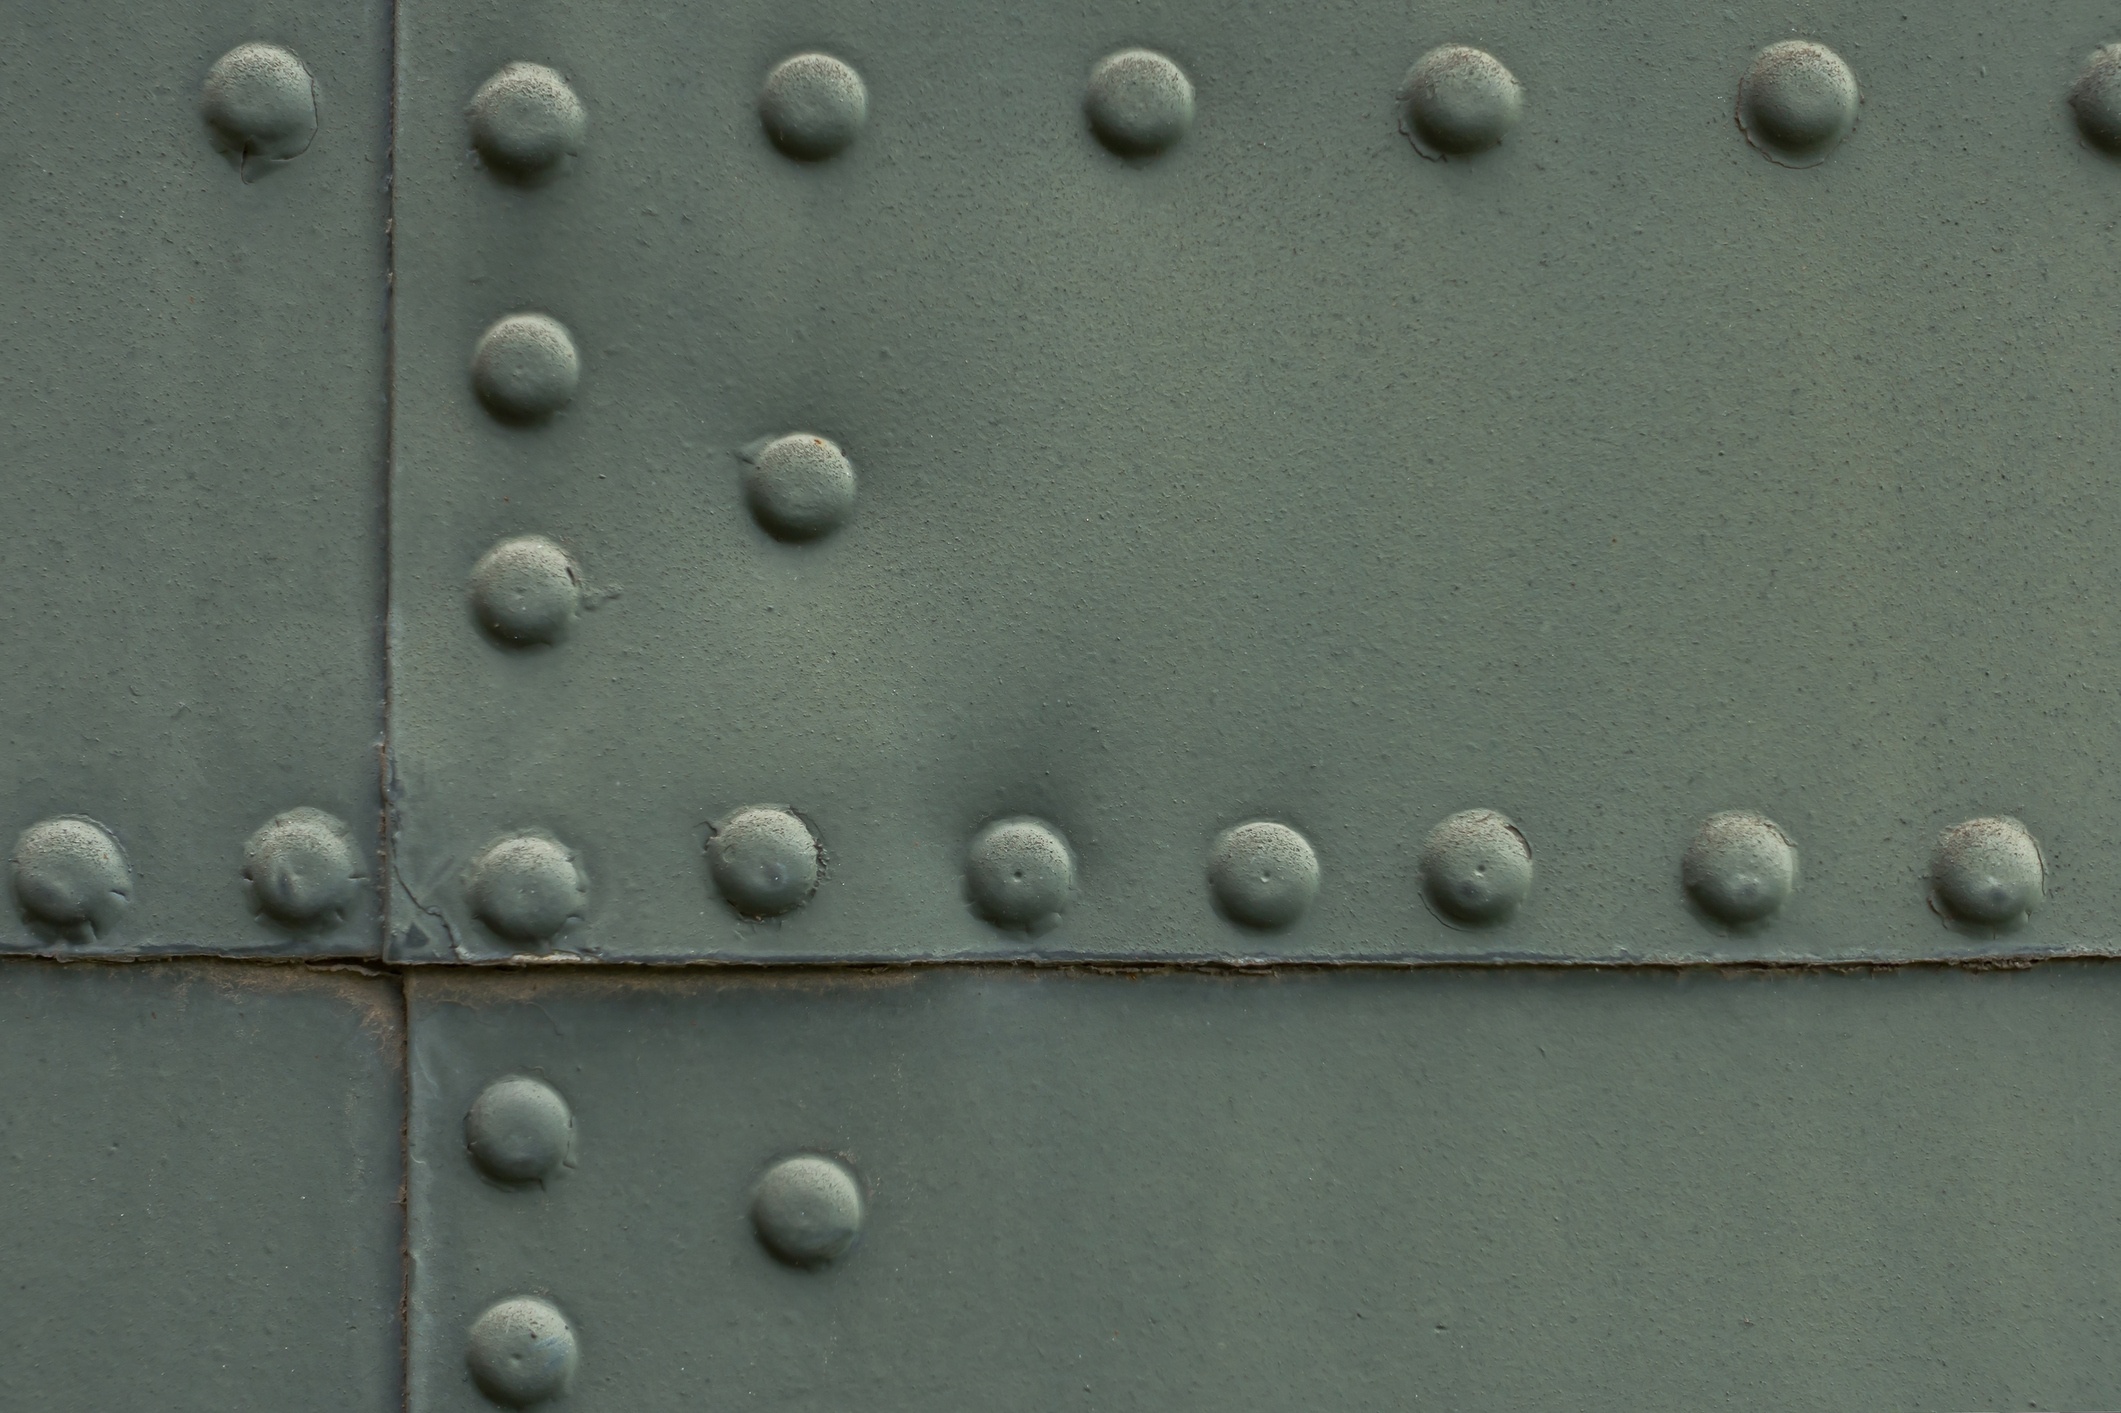 rivets popping as silo falls